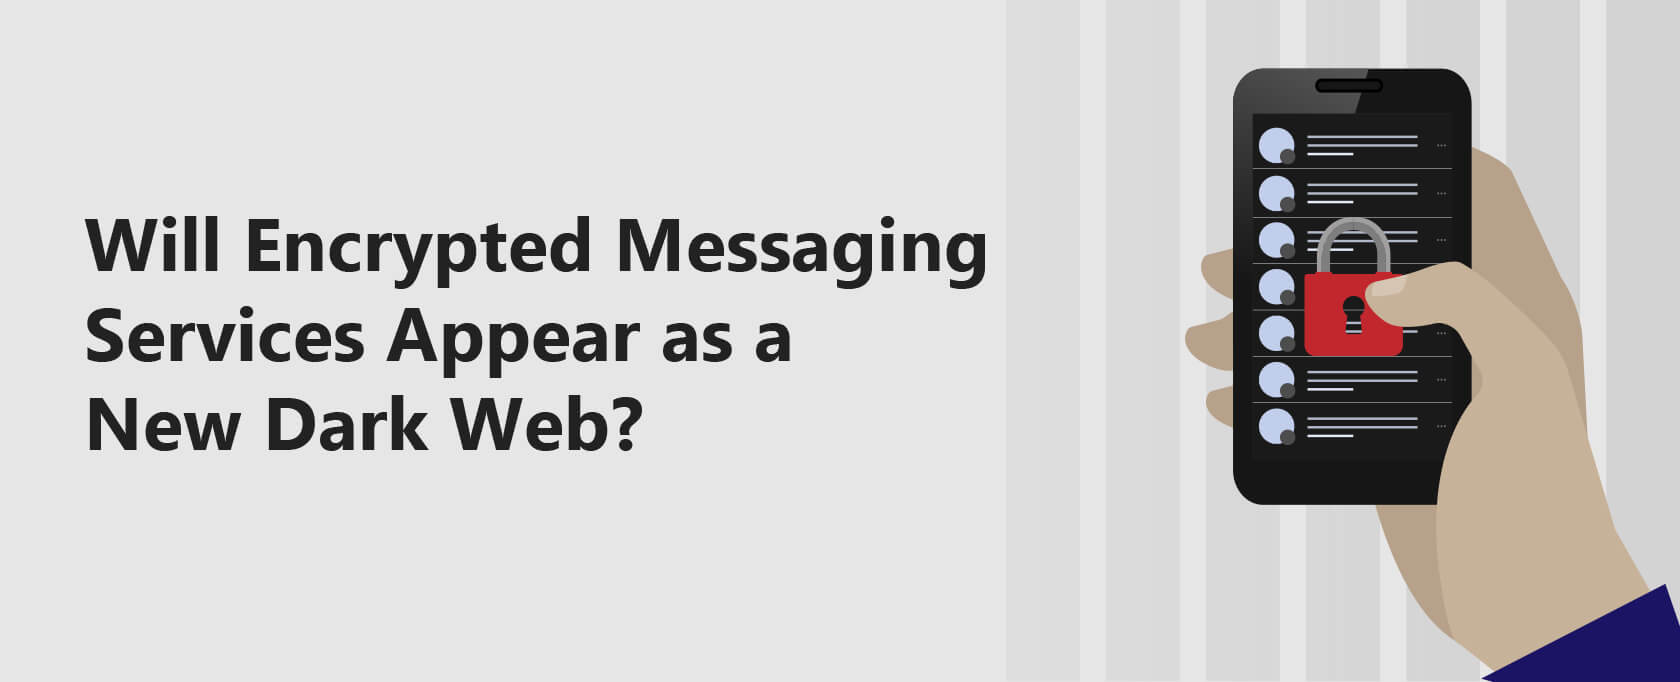 Will Encrypted Messaging Services Become the New Dark Web?